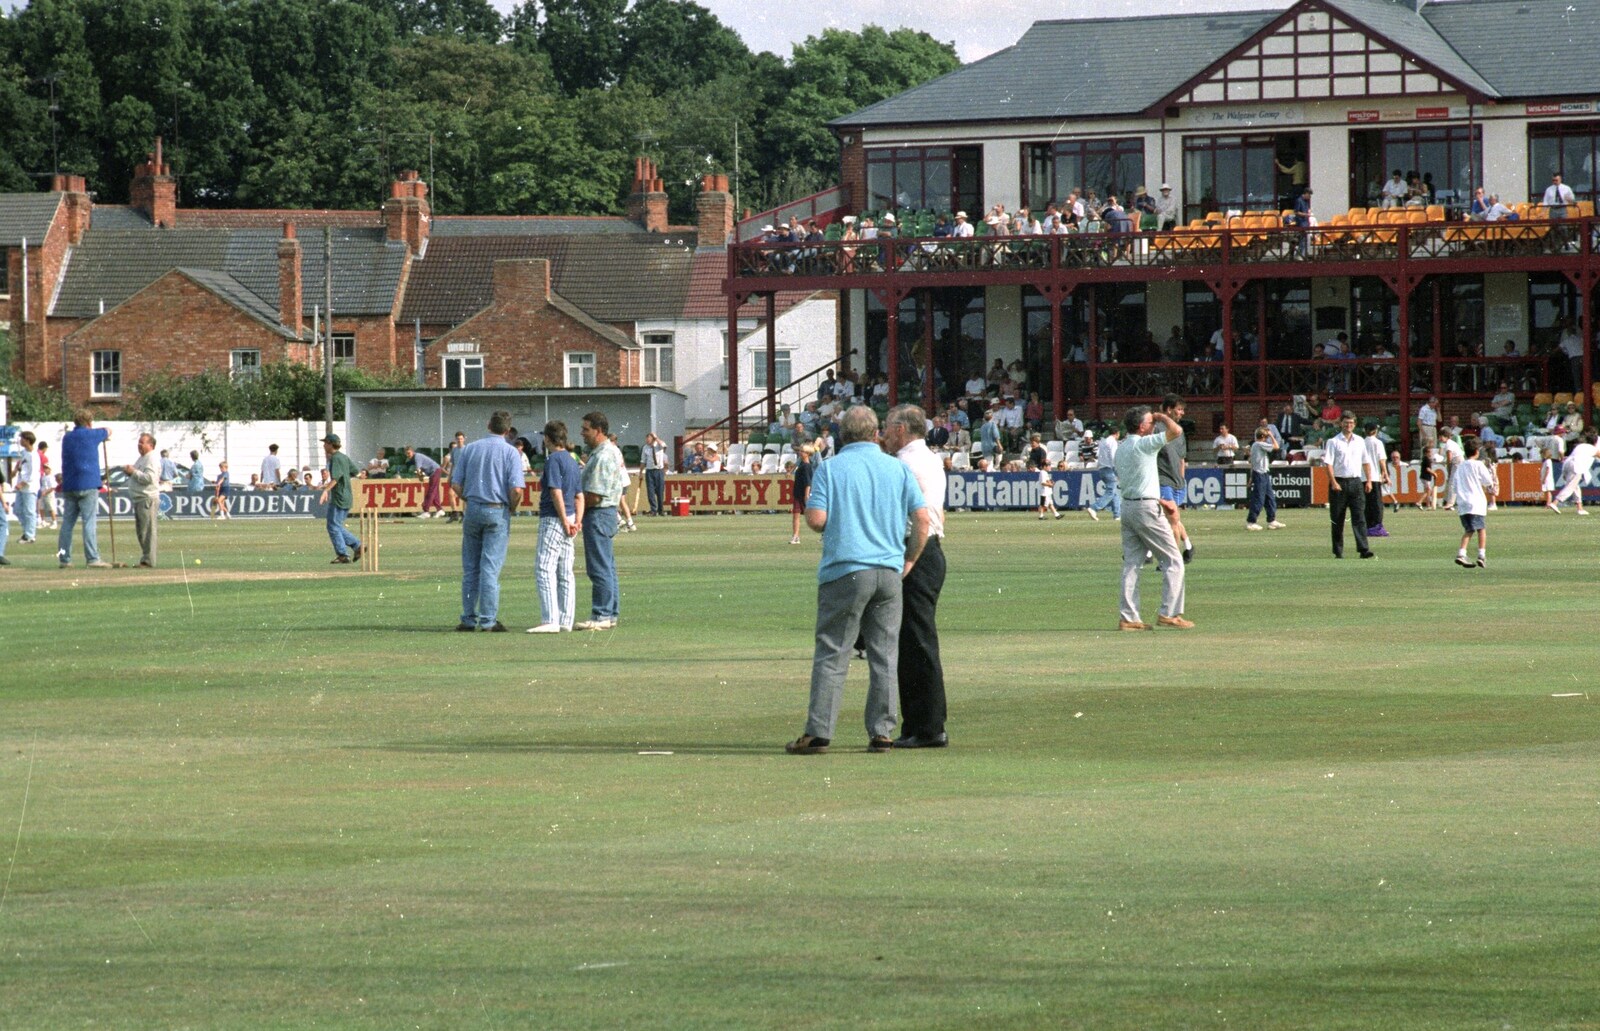 A Spot of Cricket, Northampton - 5th September 1994: A pitch invasion after the match